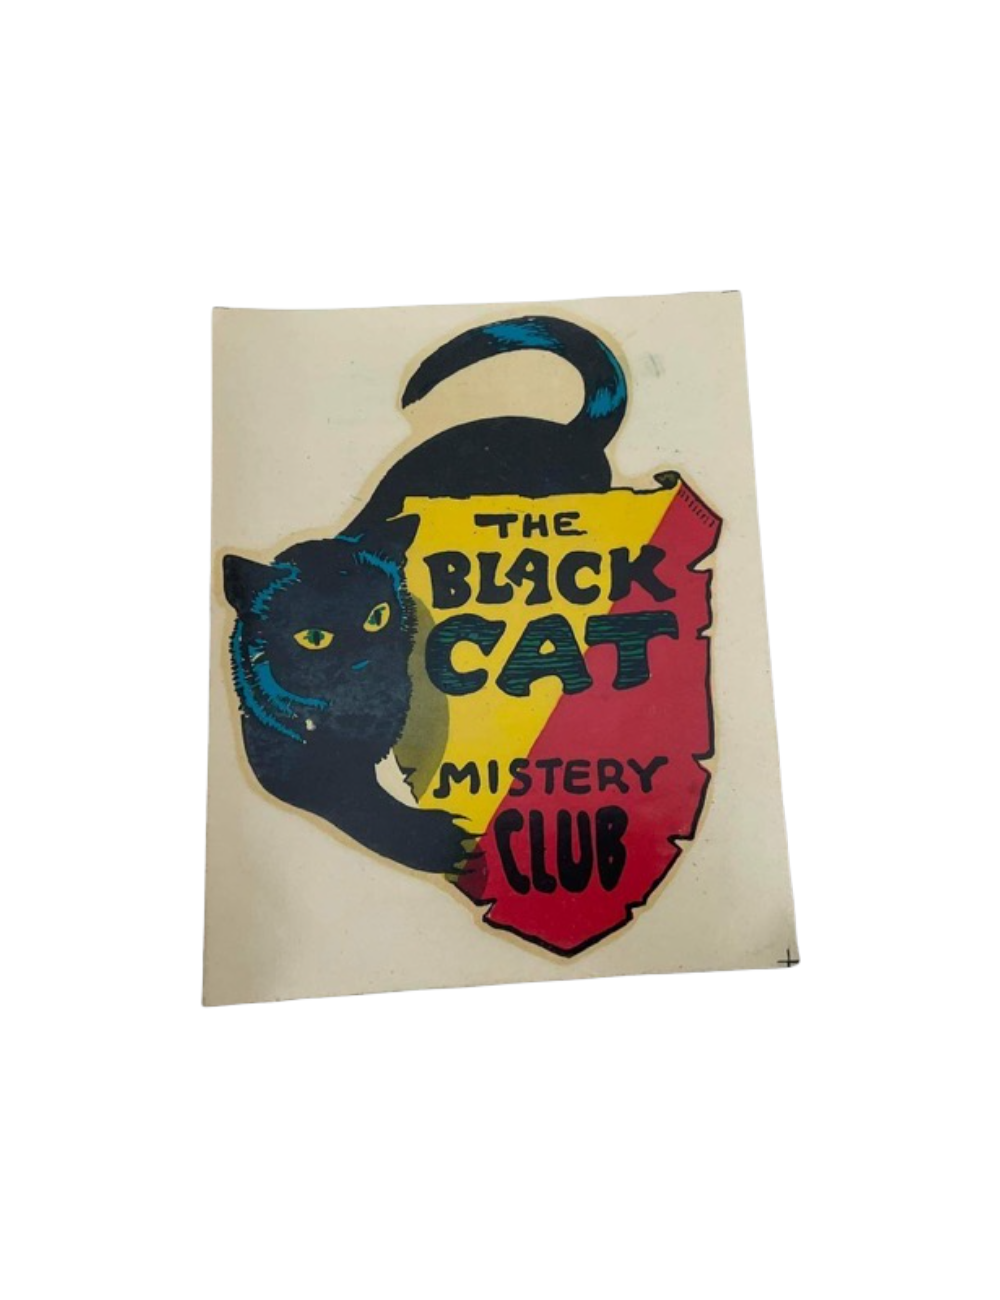 Decal " The Black Cat - Mistery Club "